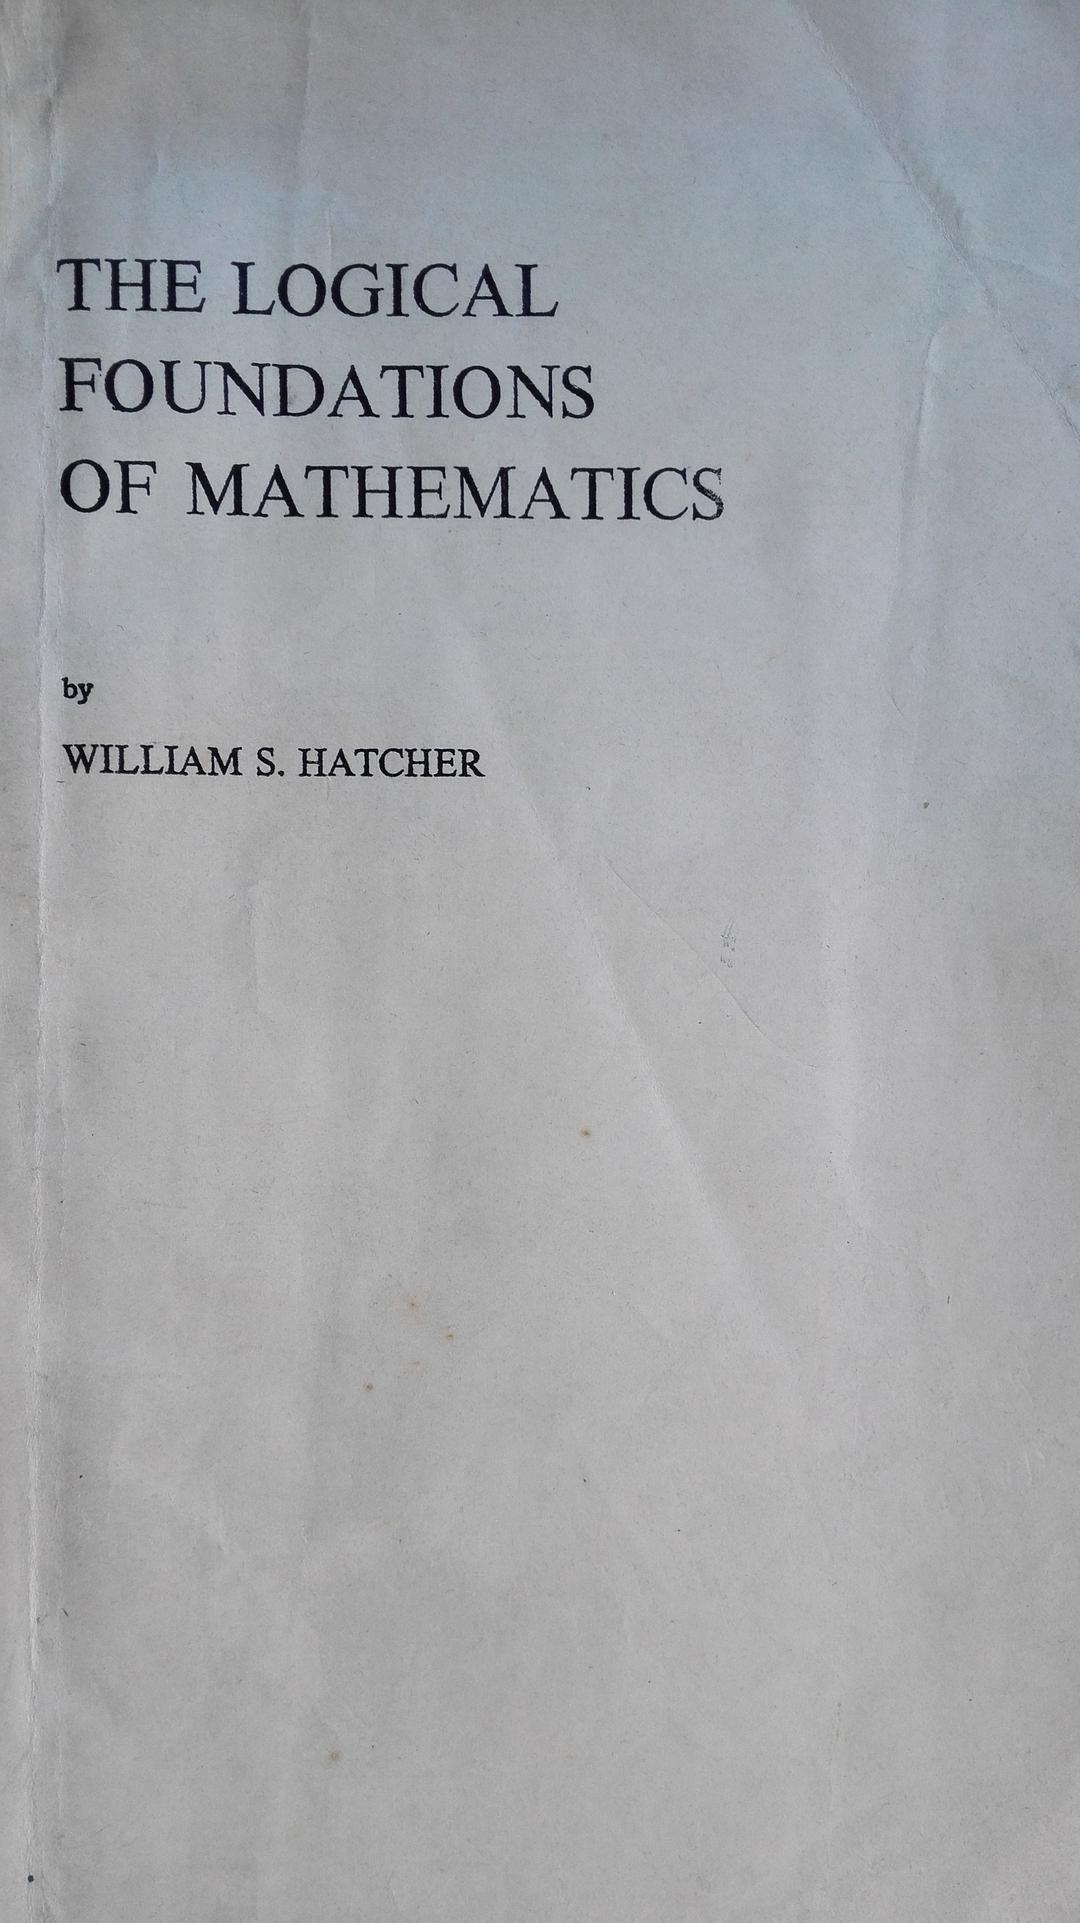 The logical foundations of mathematics